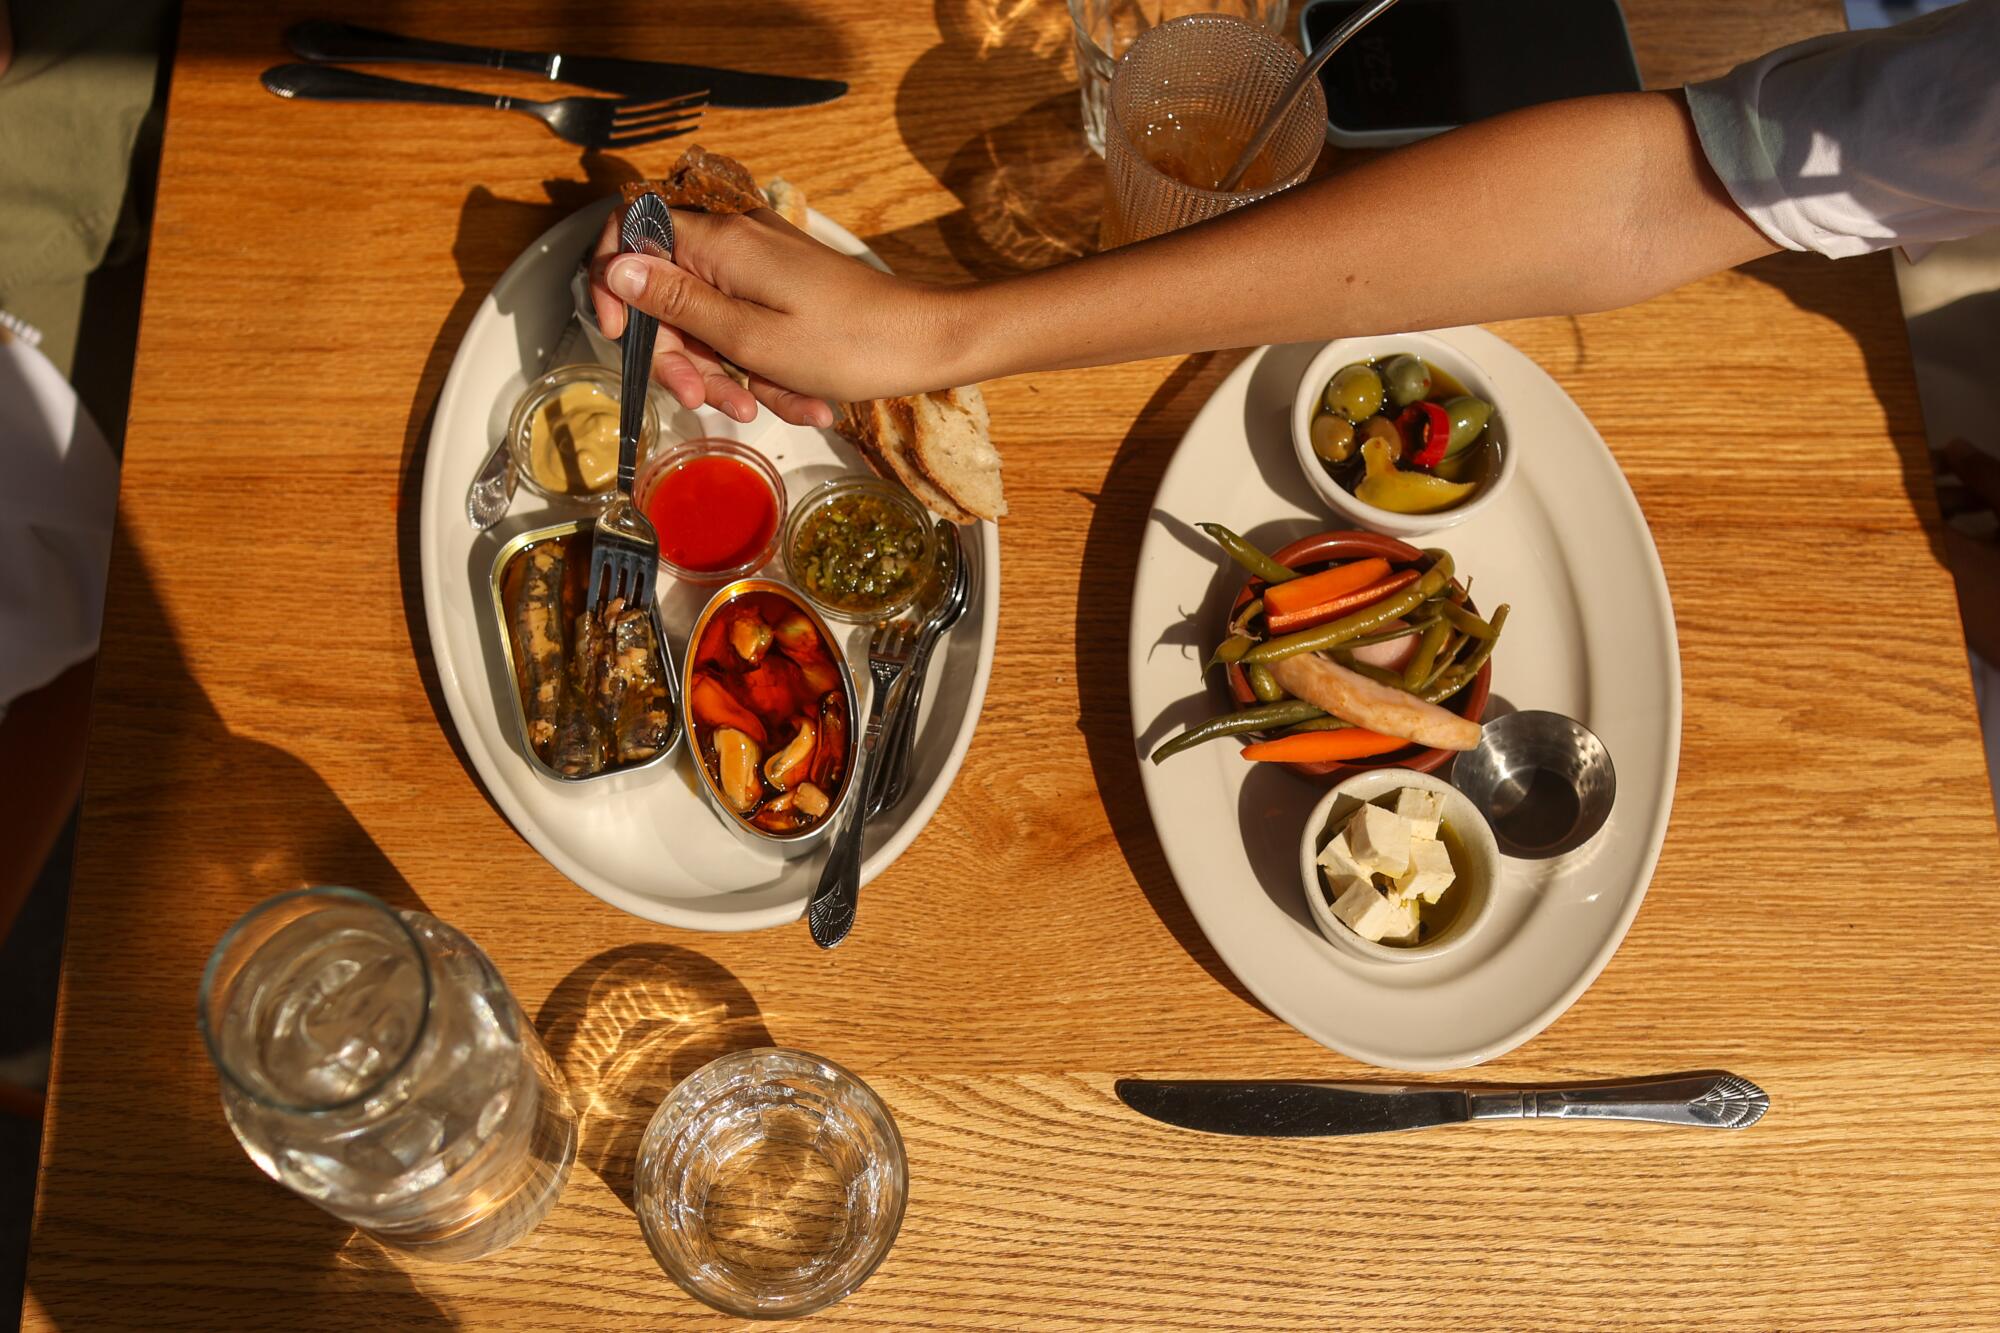 A spread of food on a wooden table.